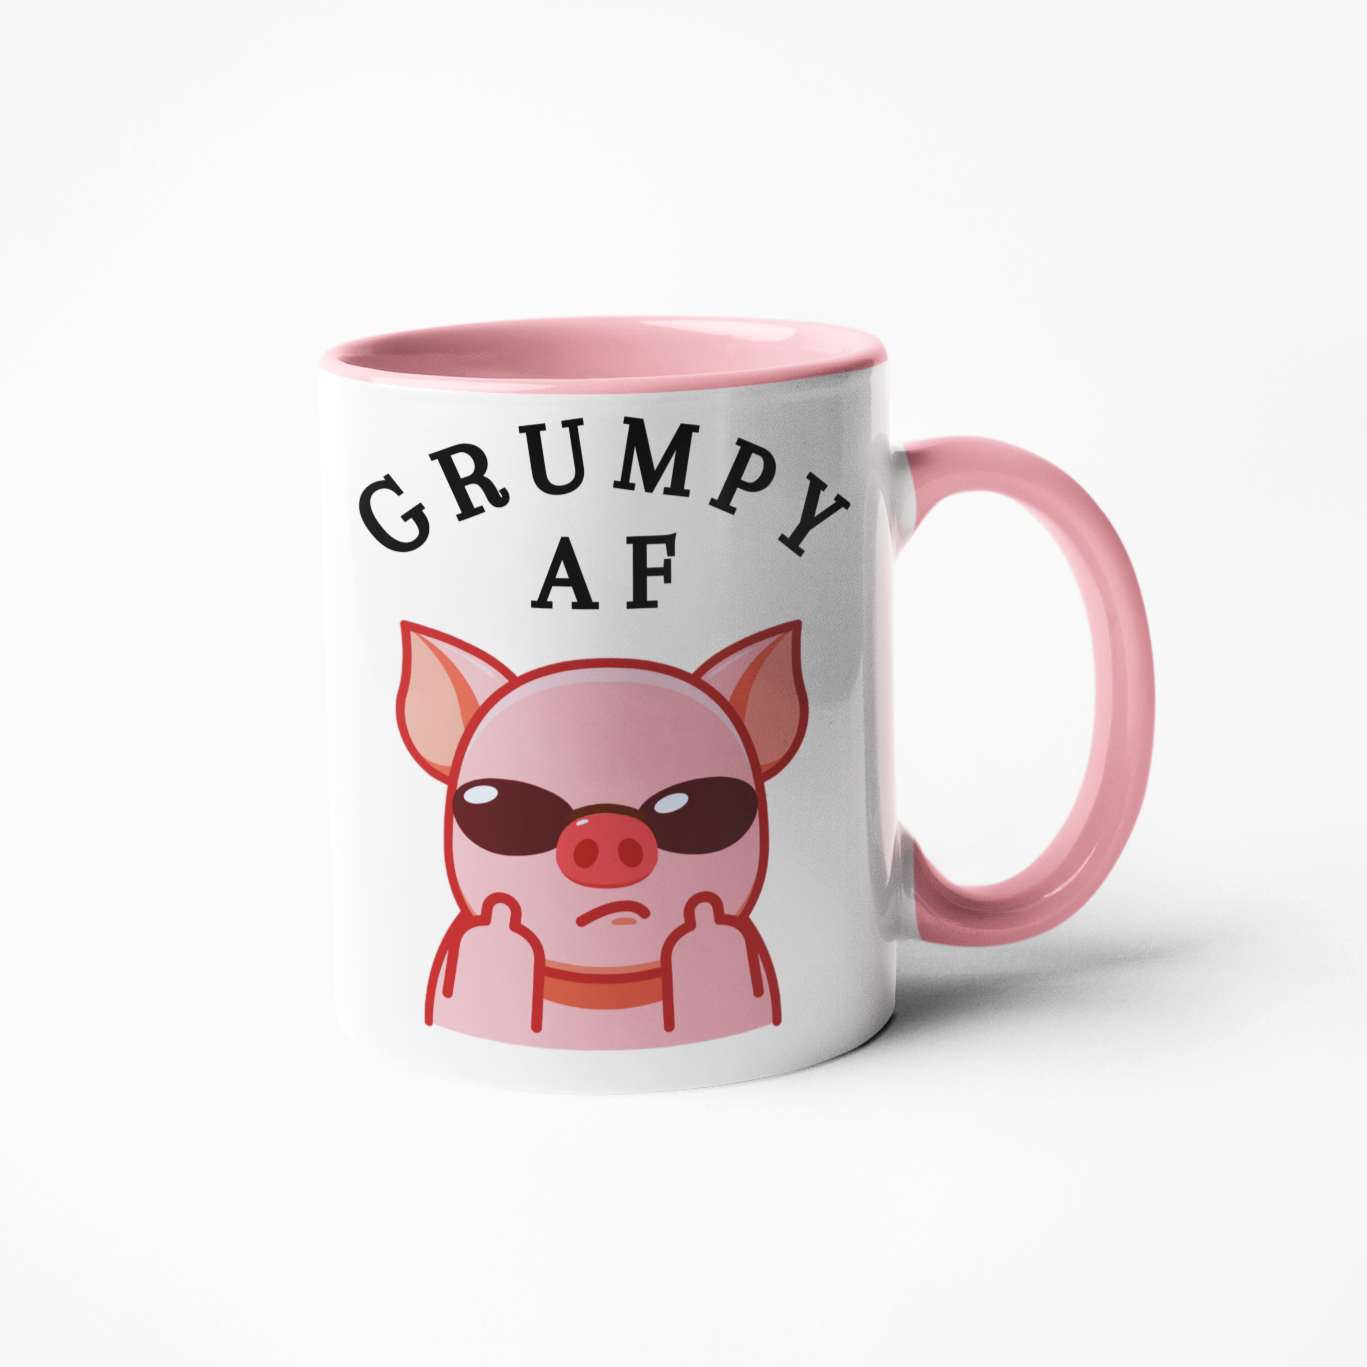 Don’t let the grumpy face fool you - the Grumpy AF pig will make a bold statement in any coffee corner! Rise and shine with this mug, perfect for anyone who loves a good challenge. Make a statement in style with this daring mug. Grumpy AF, game on! 